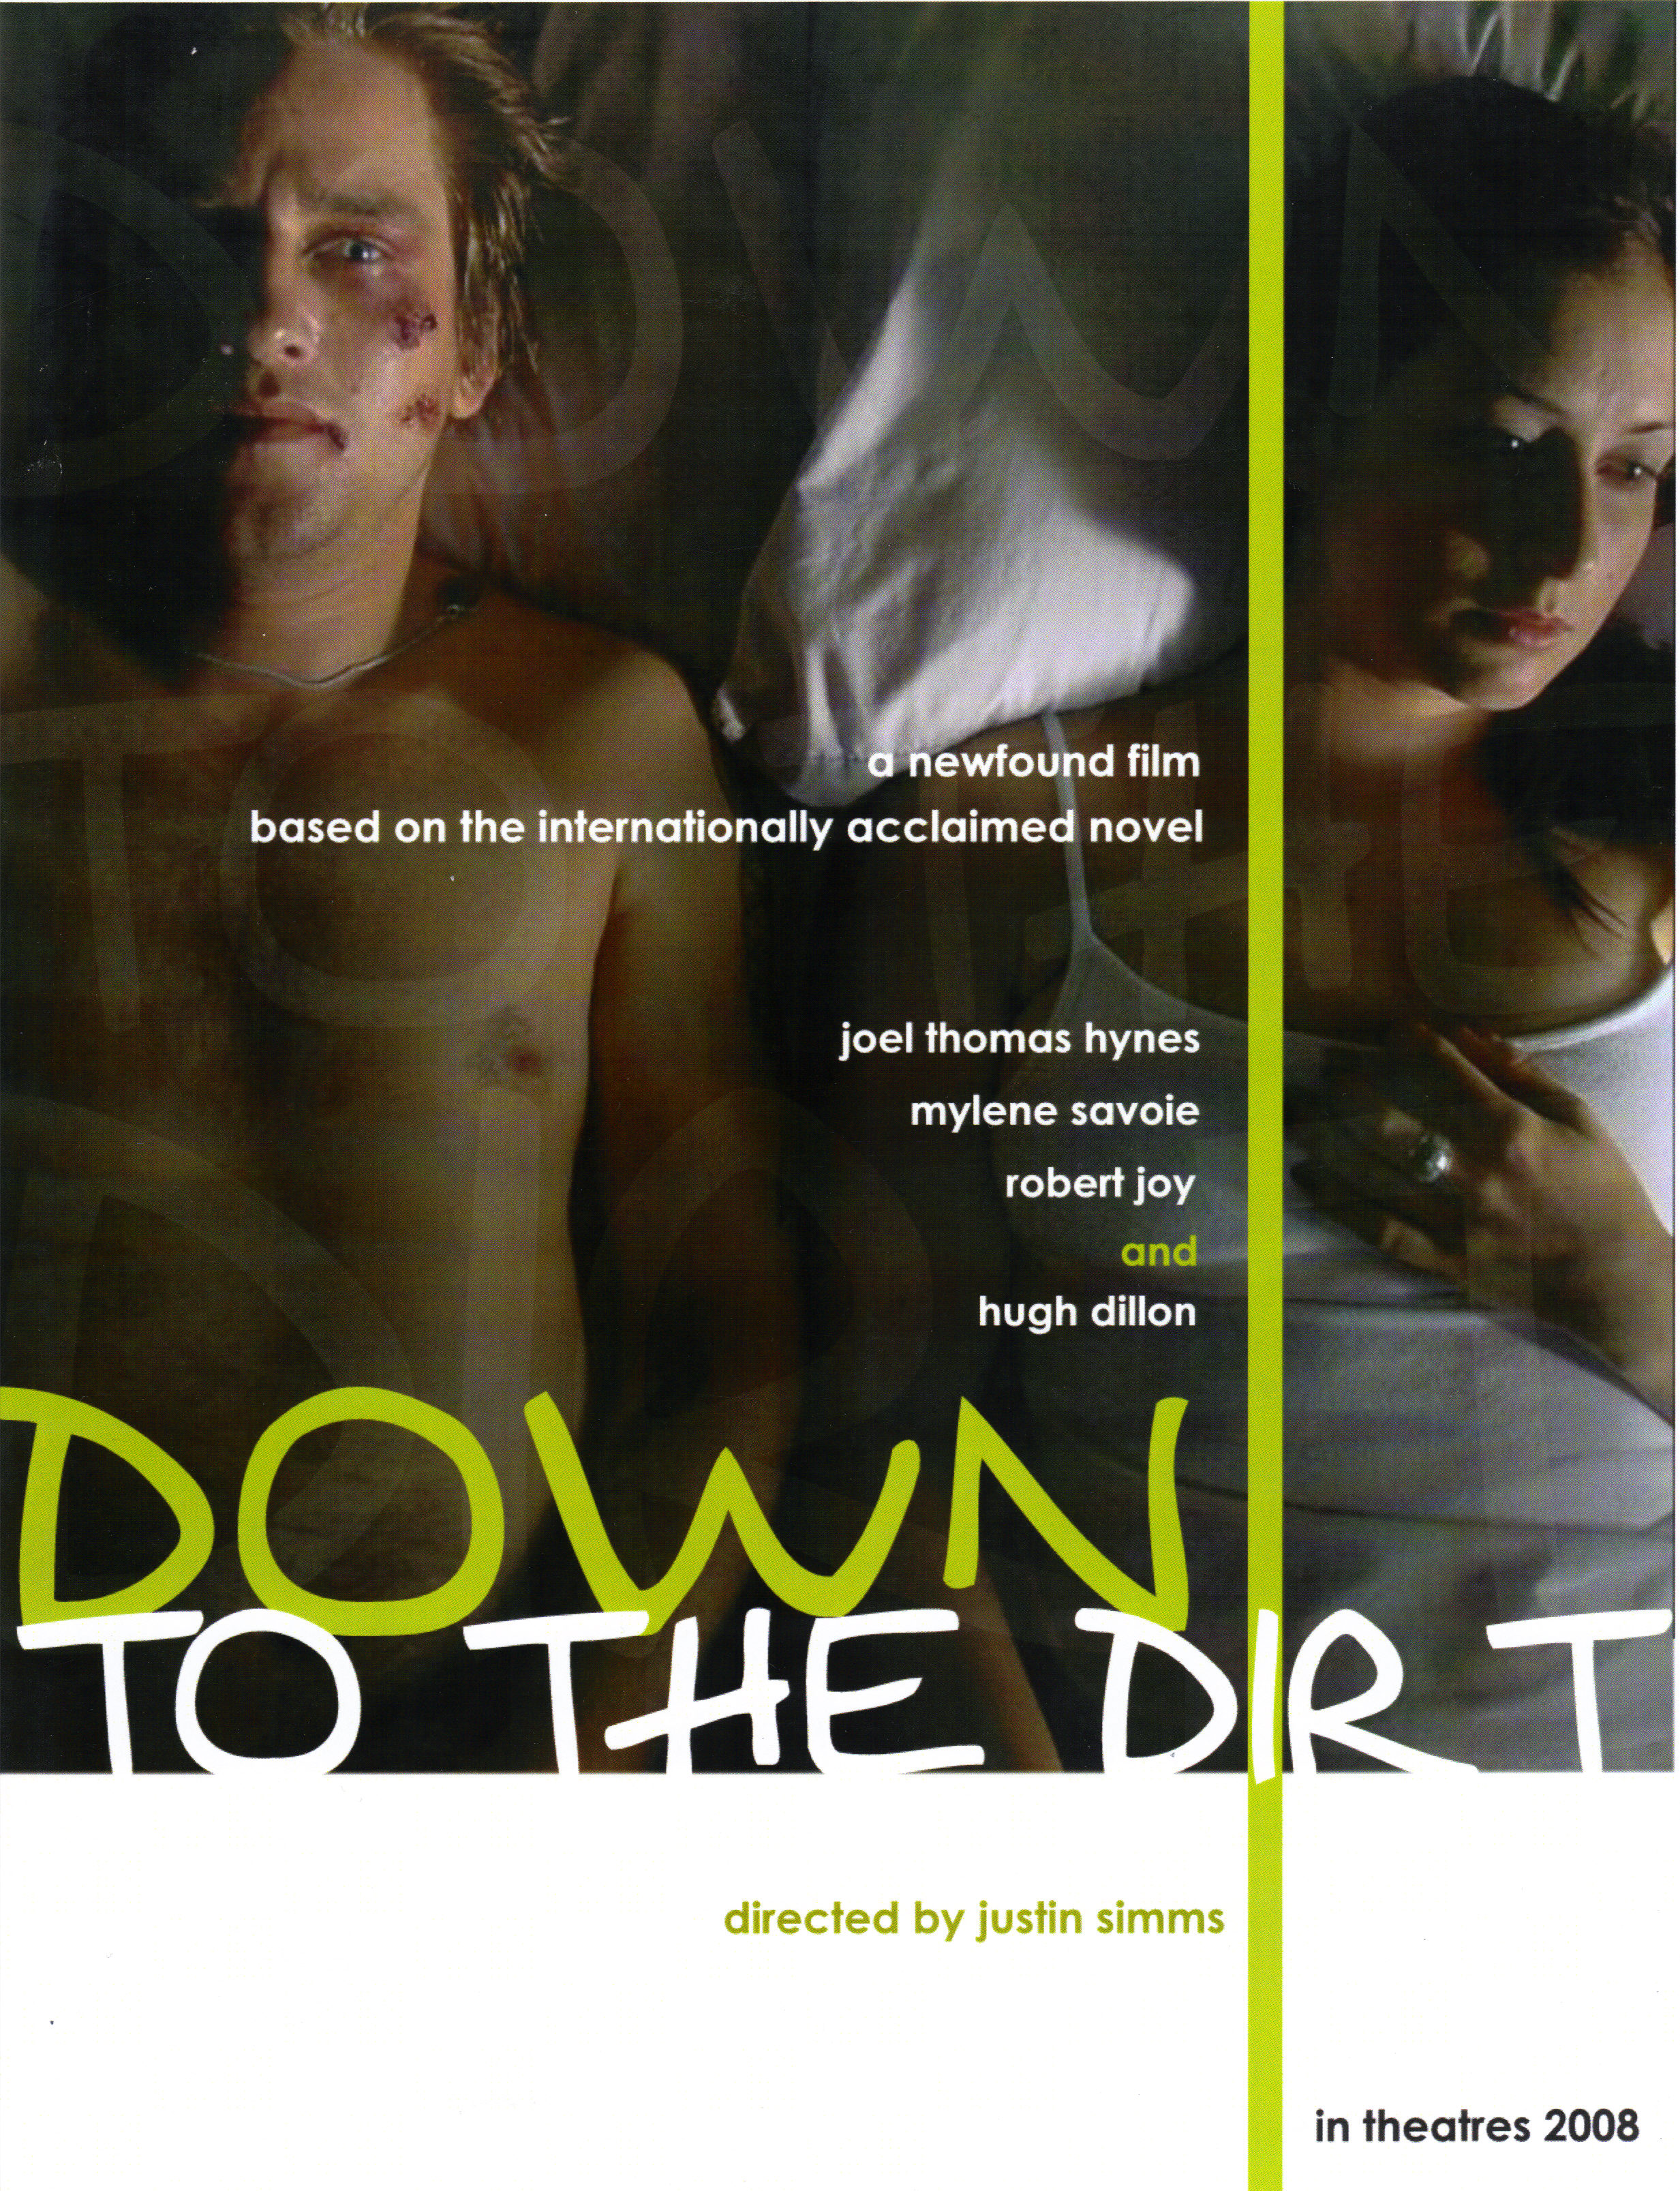 Down To The Dirt promotion